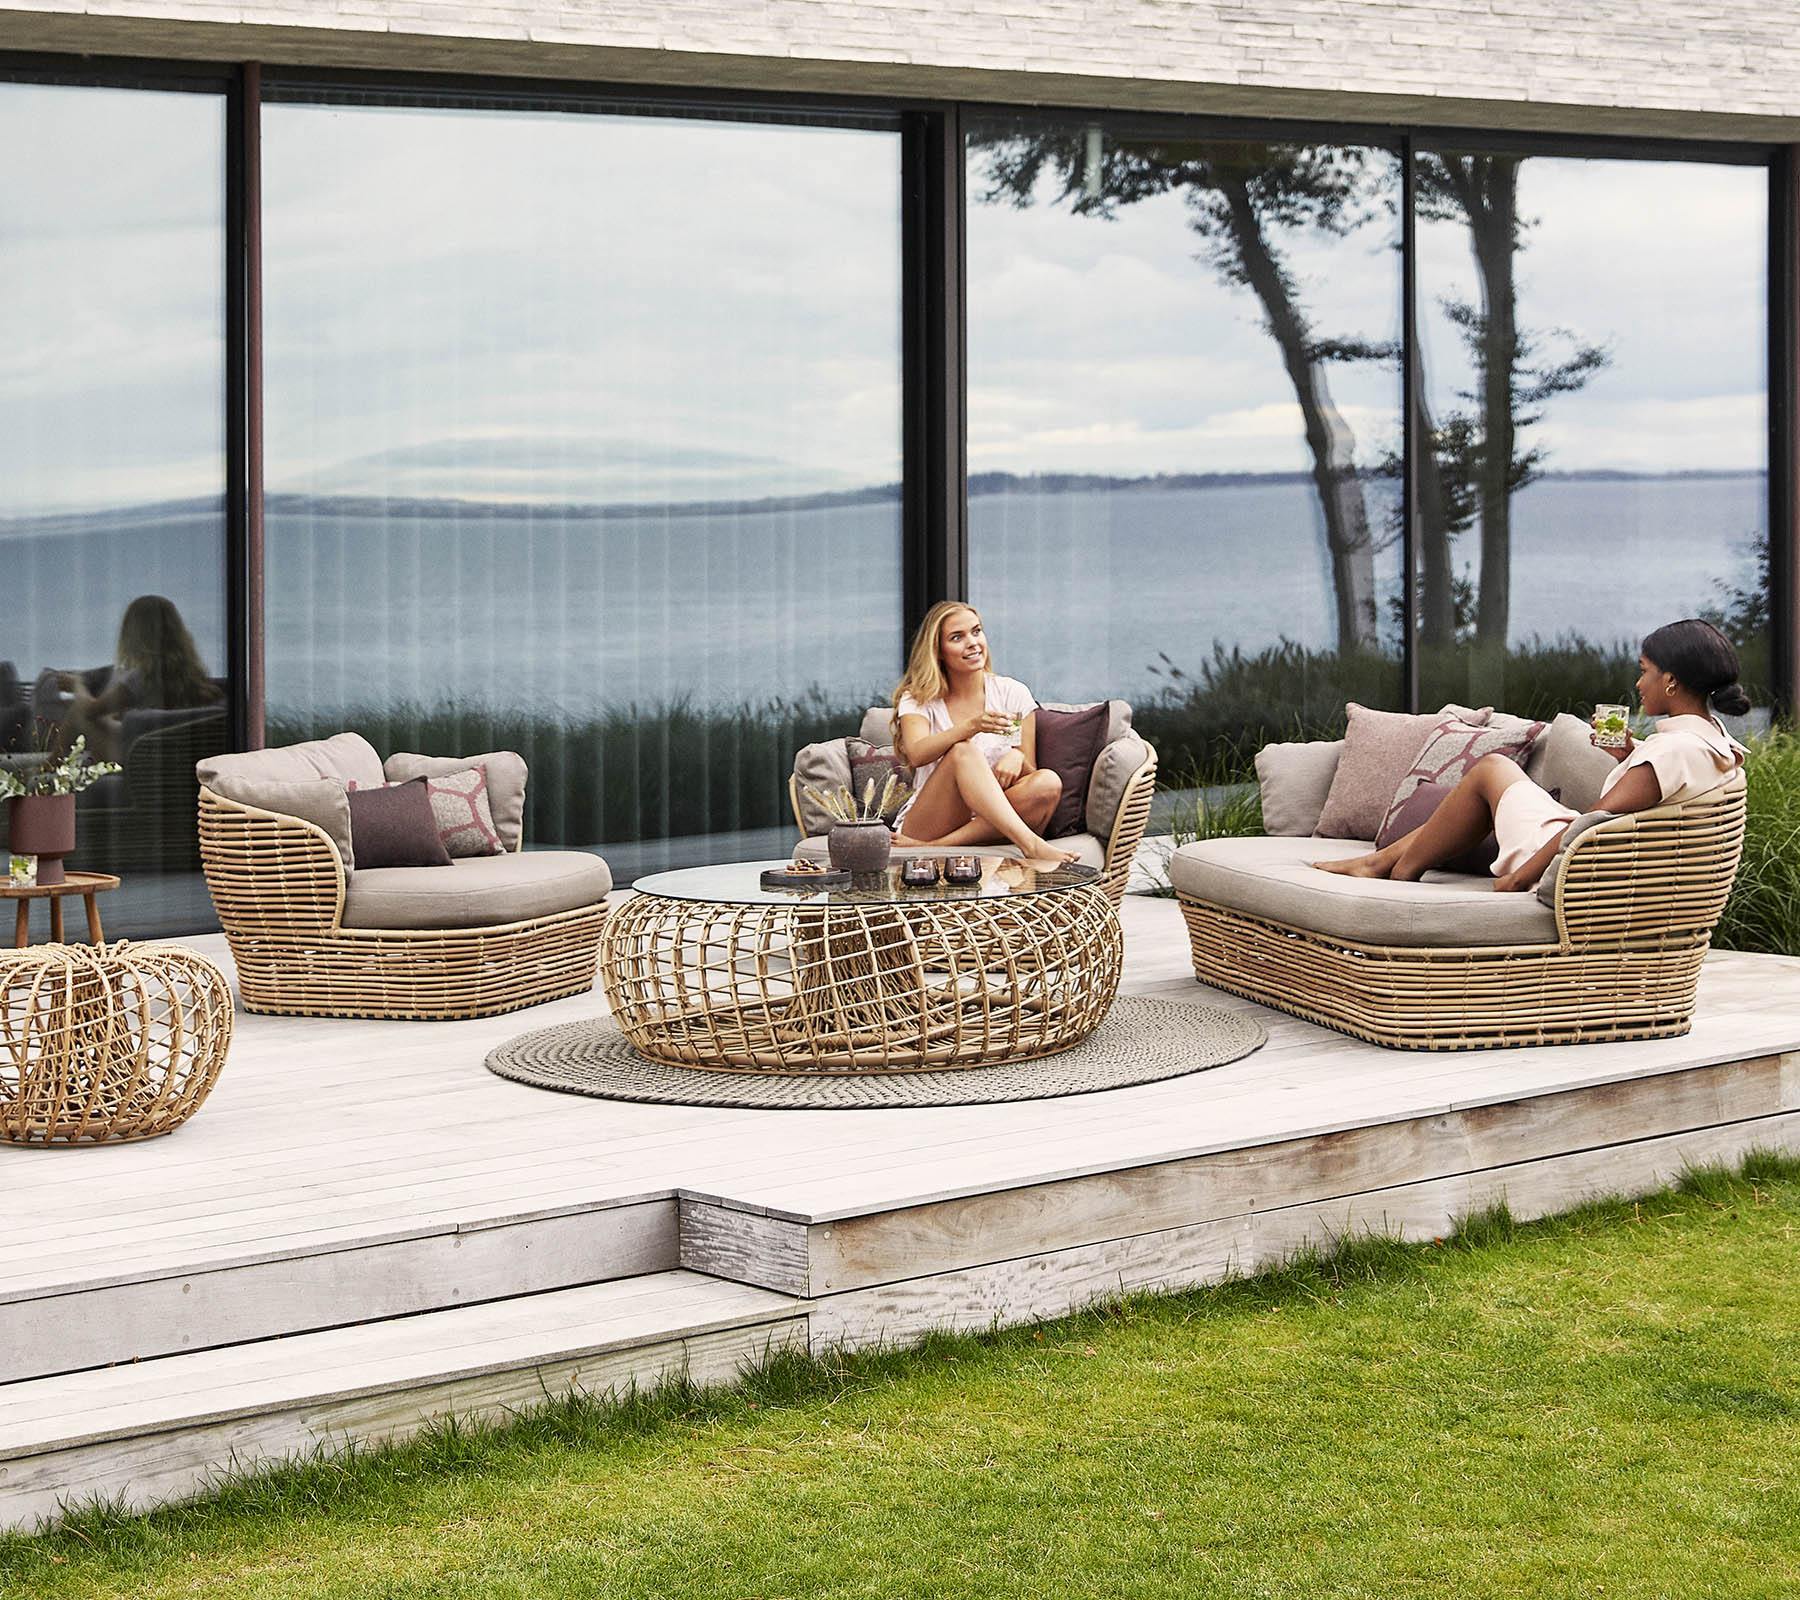 Cane-Line Denmark Outdoor Sofa Basket 2-seater sofa, incl. Cane-line AirTouch cushions, Cane-line Weave